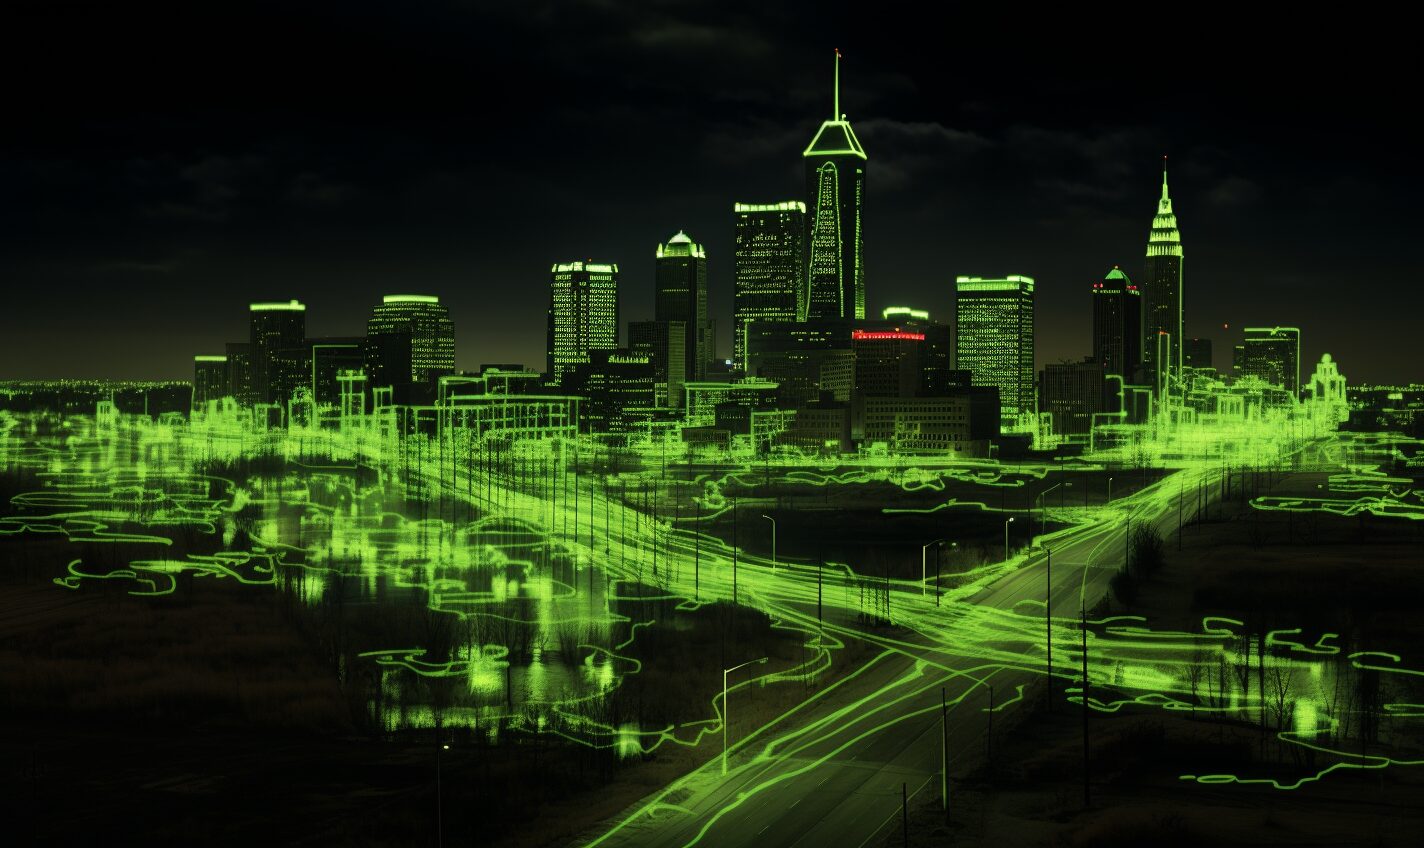 fort wayne, indiana in black and neon green glow